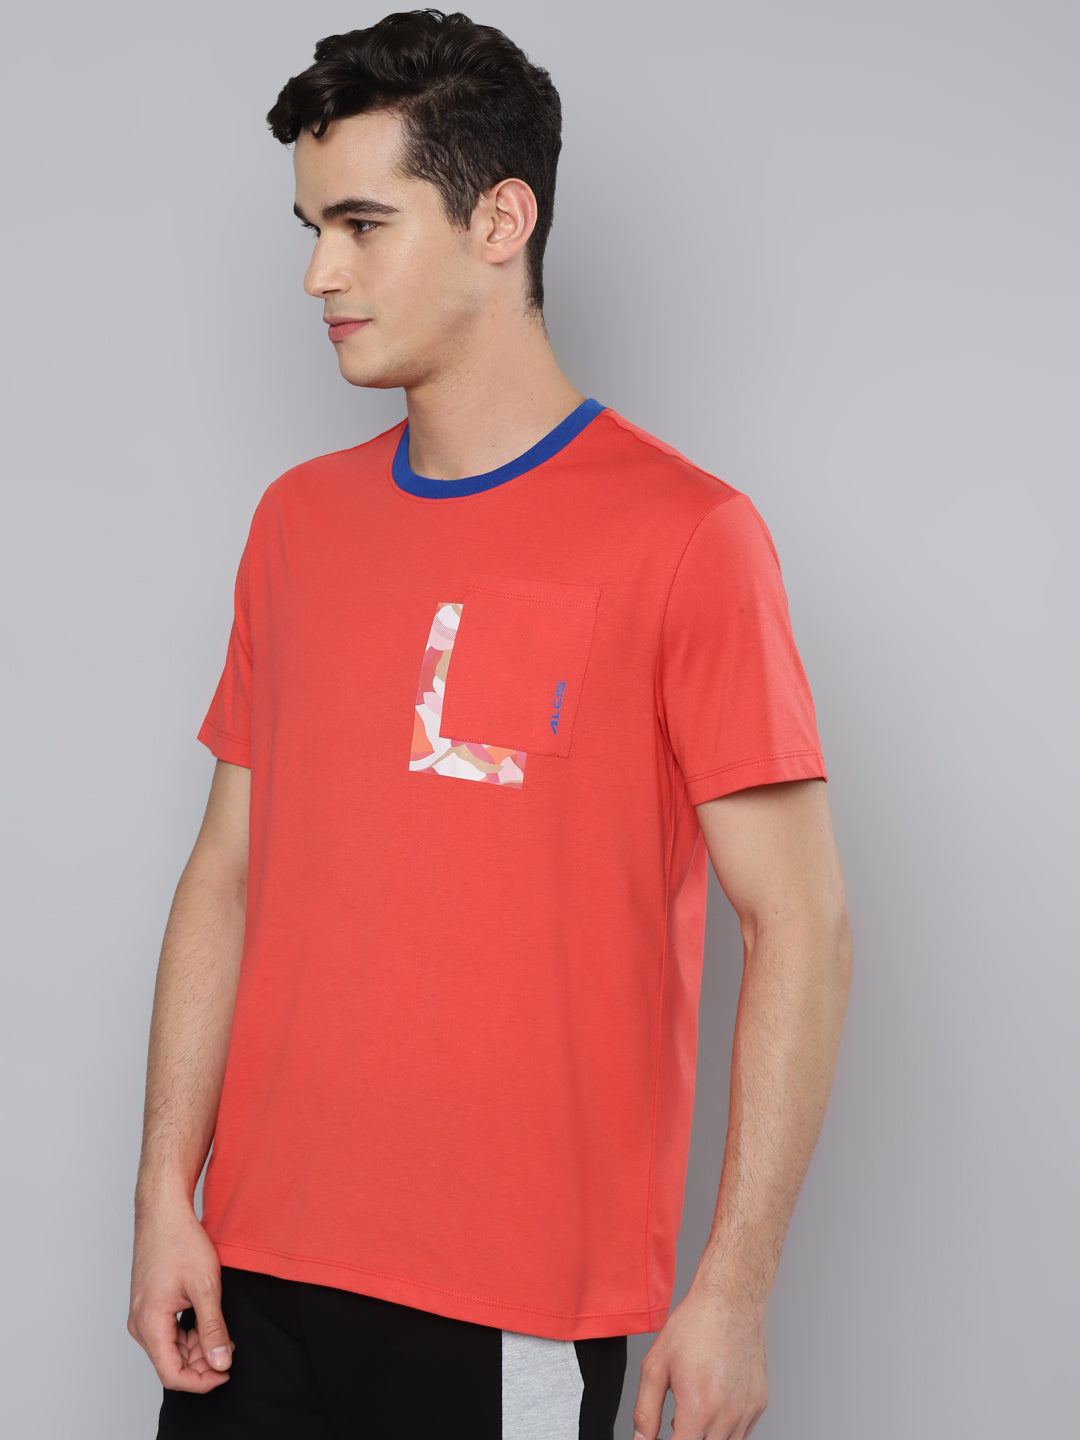 Alcis Men Coral Red Slim Fit Running T-shirt